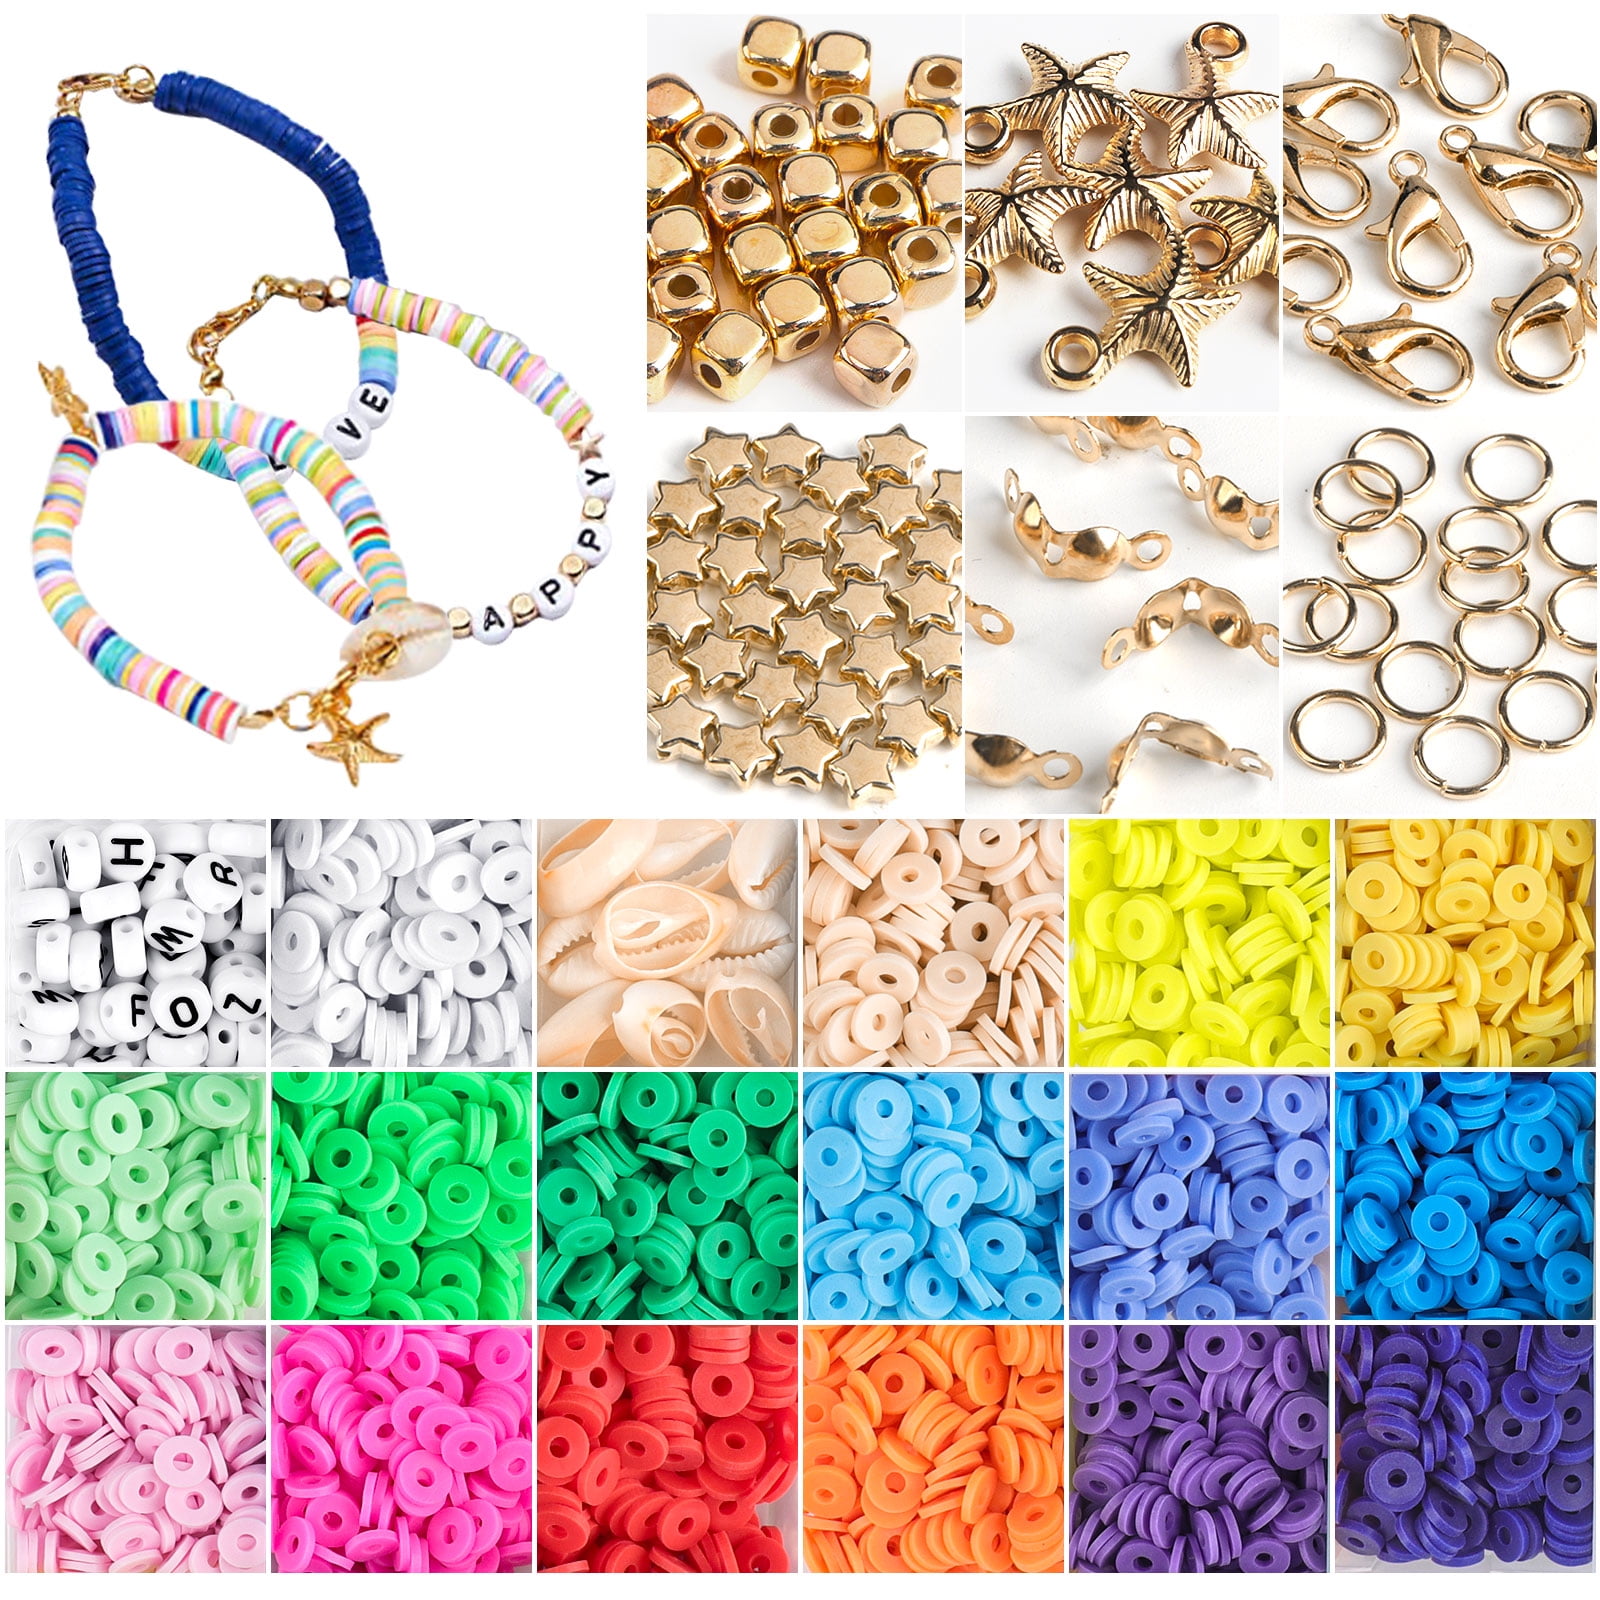 Bulk Buy China Wholesale 3600 Pcs 6mm Round Clay Beads Jewelry Kit,  Bracelet Diy Spacer Flat Polymer Clay Bead Set $4.27 from Yiwu Jing Can  Crystal Co., Ltd.